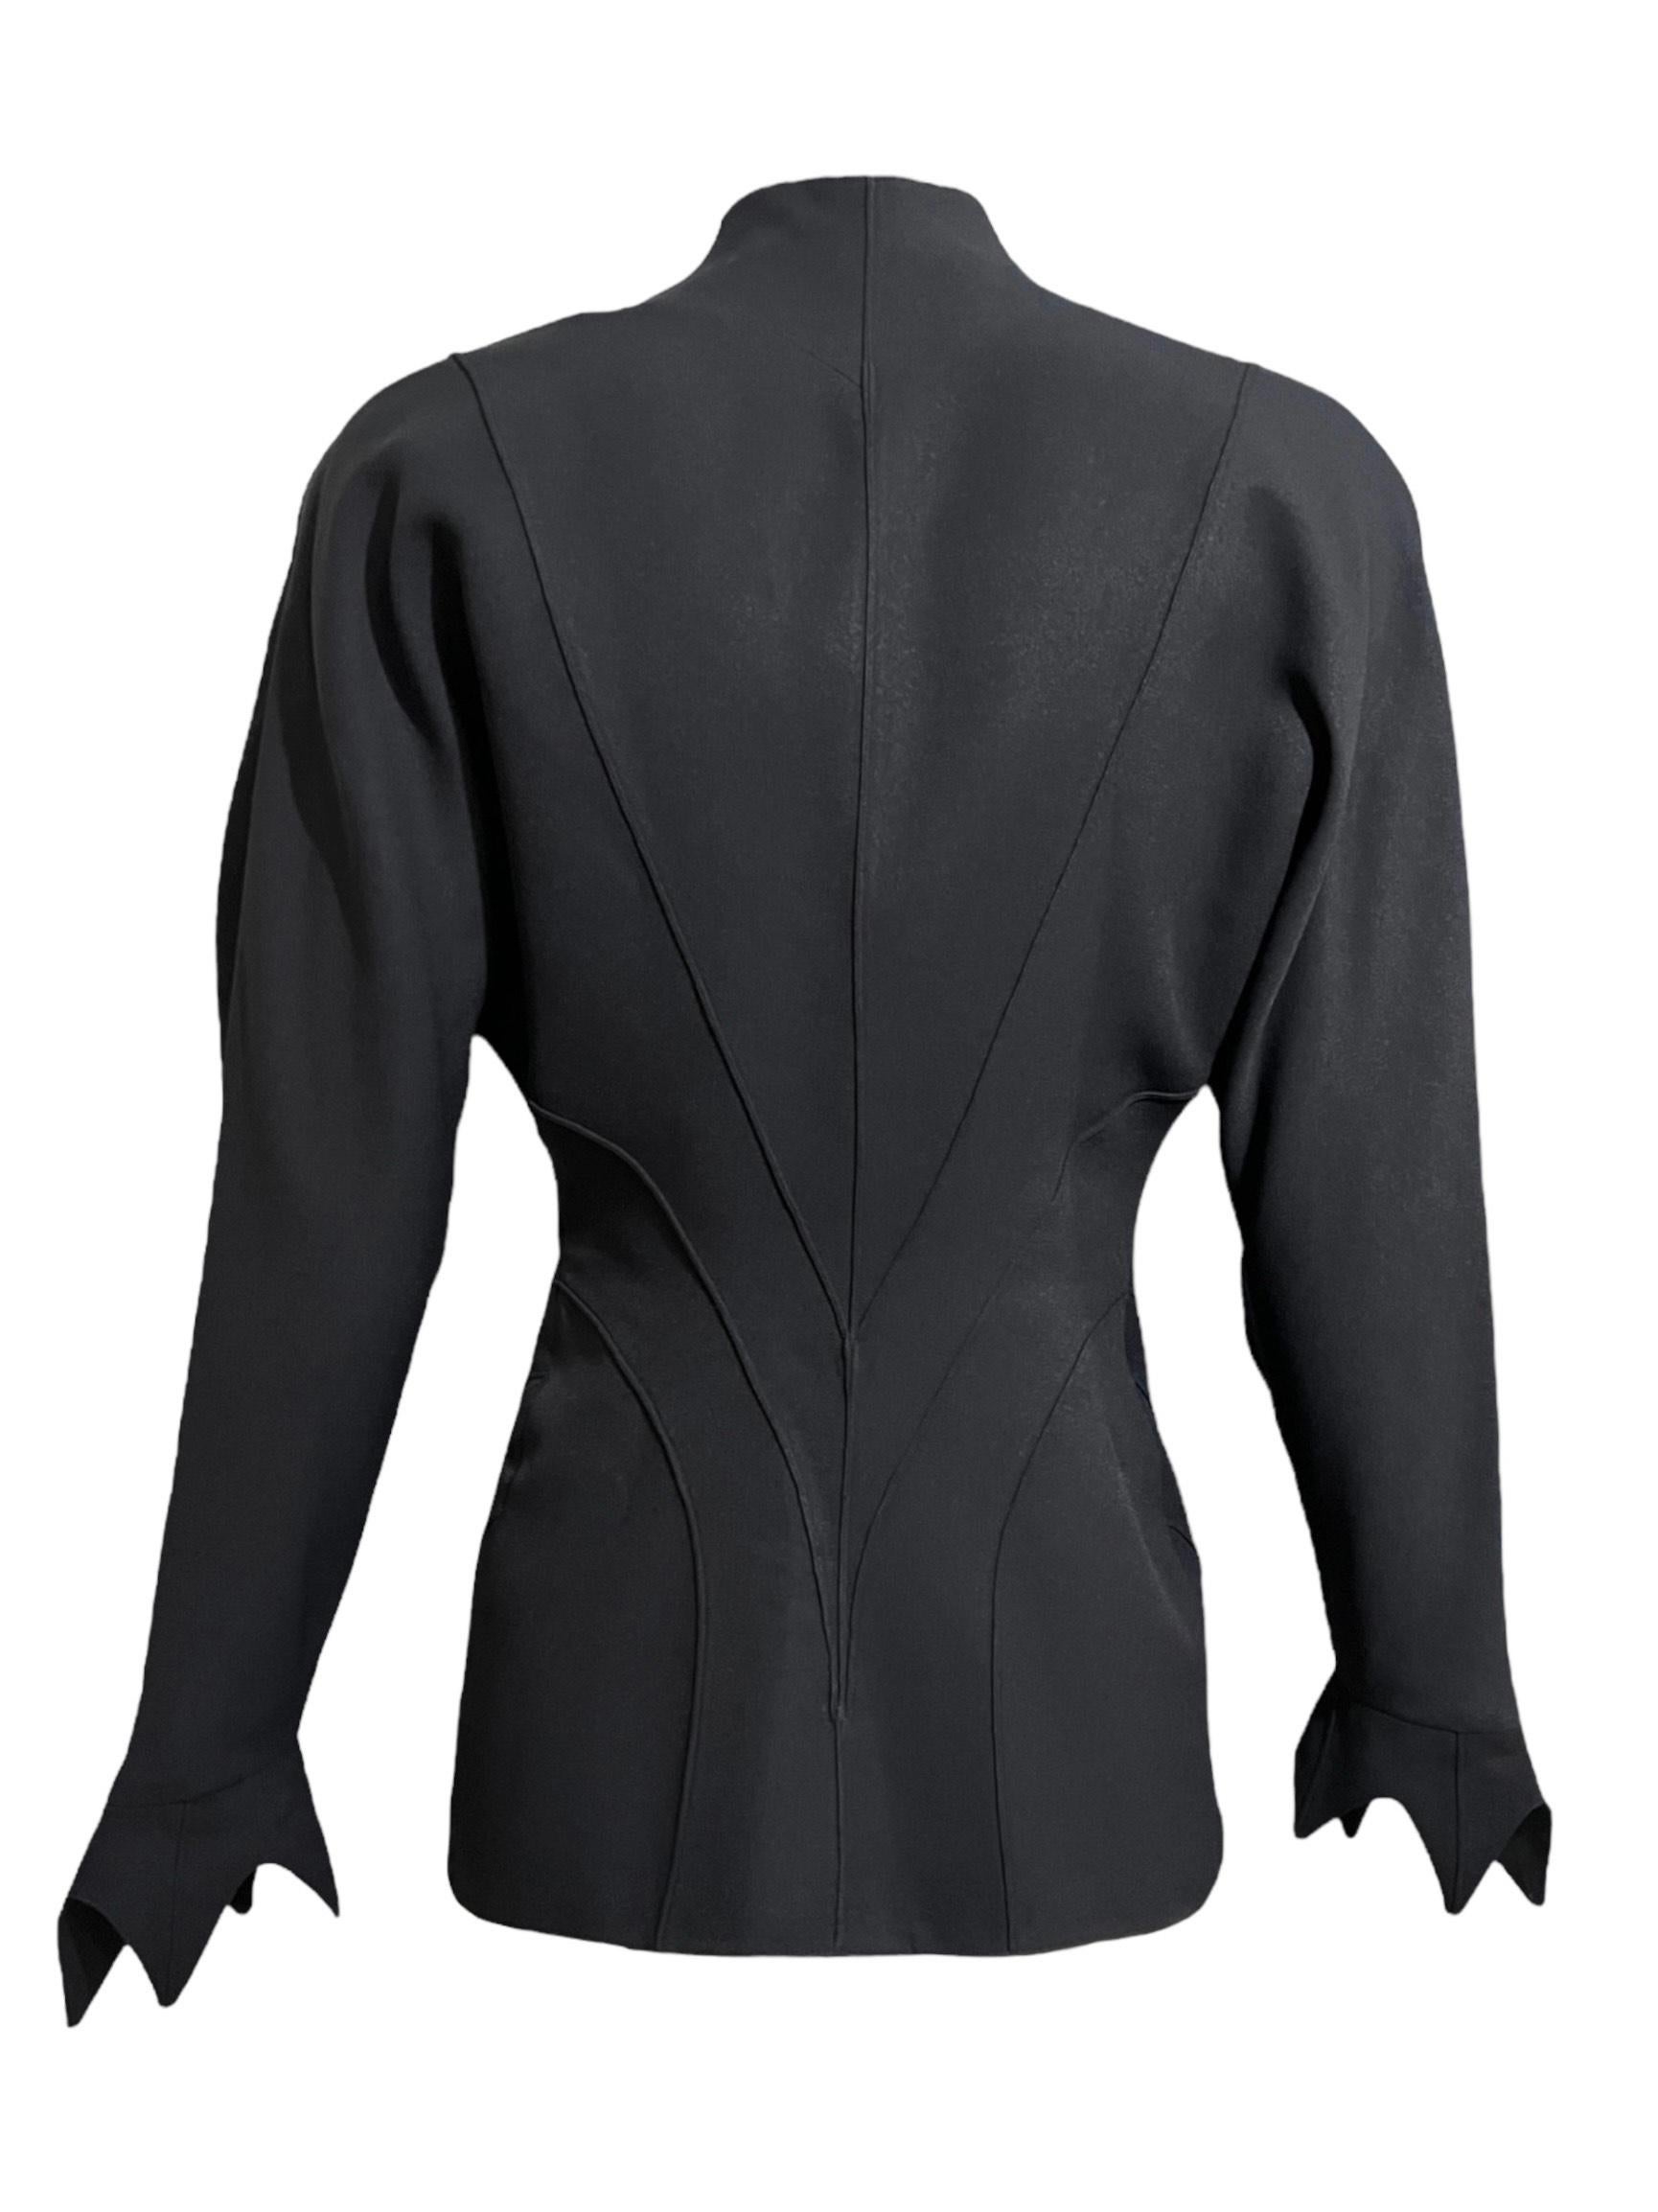 S/S 1989 Thierry Mugler Runway Sculptural Black Pointed Cutout Jacket  For Sale 8